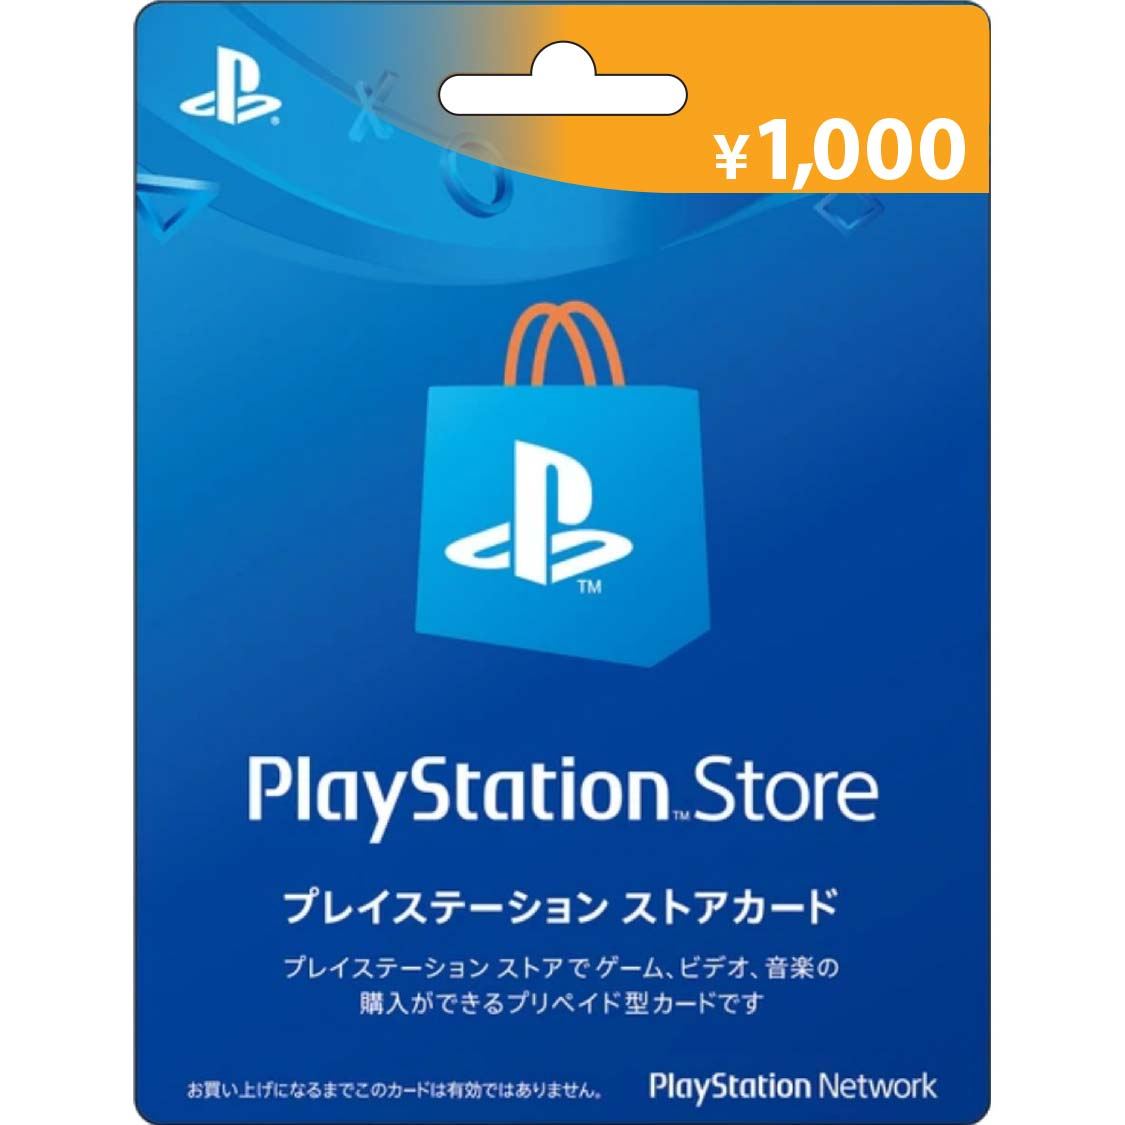 afterpay playstation store